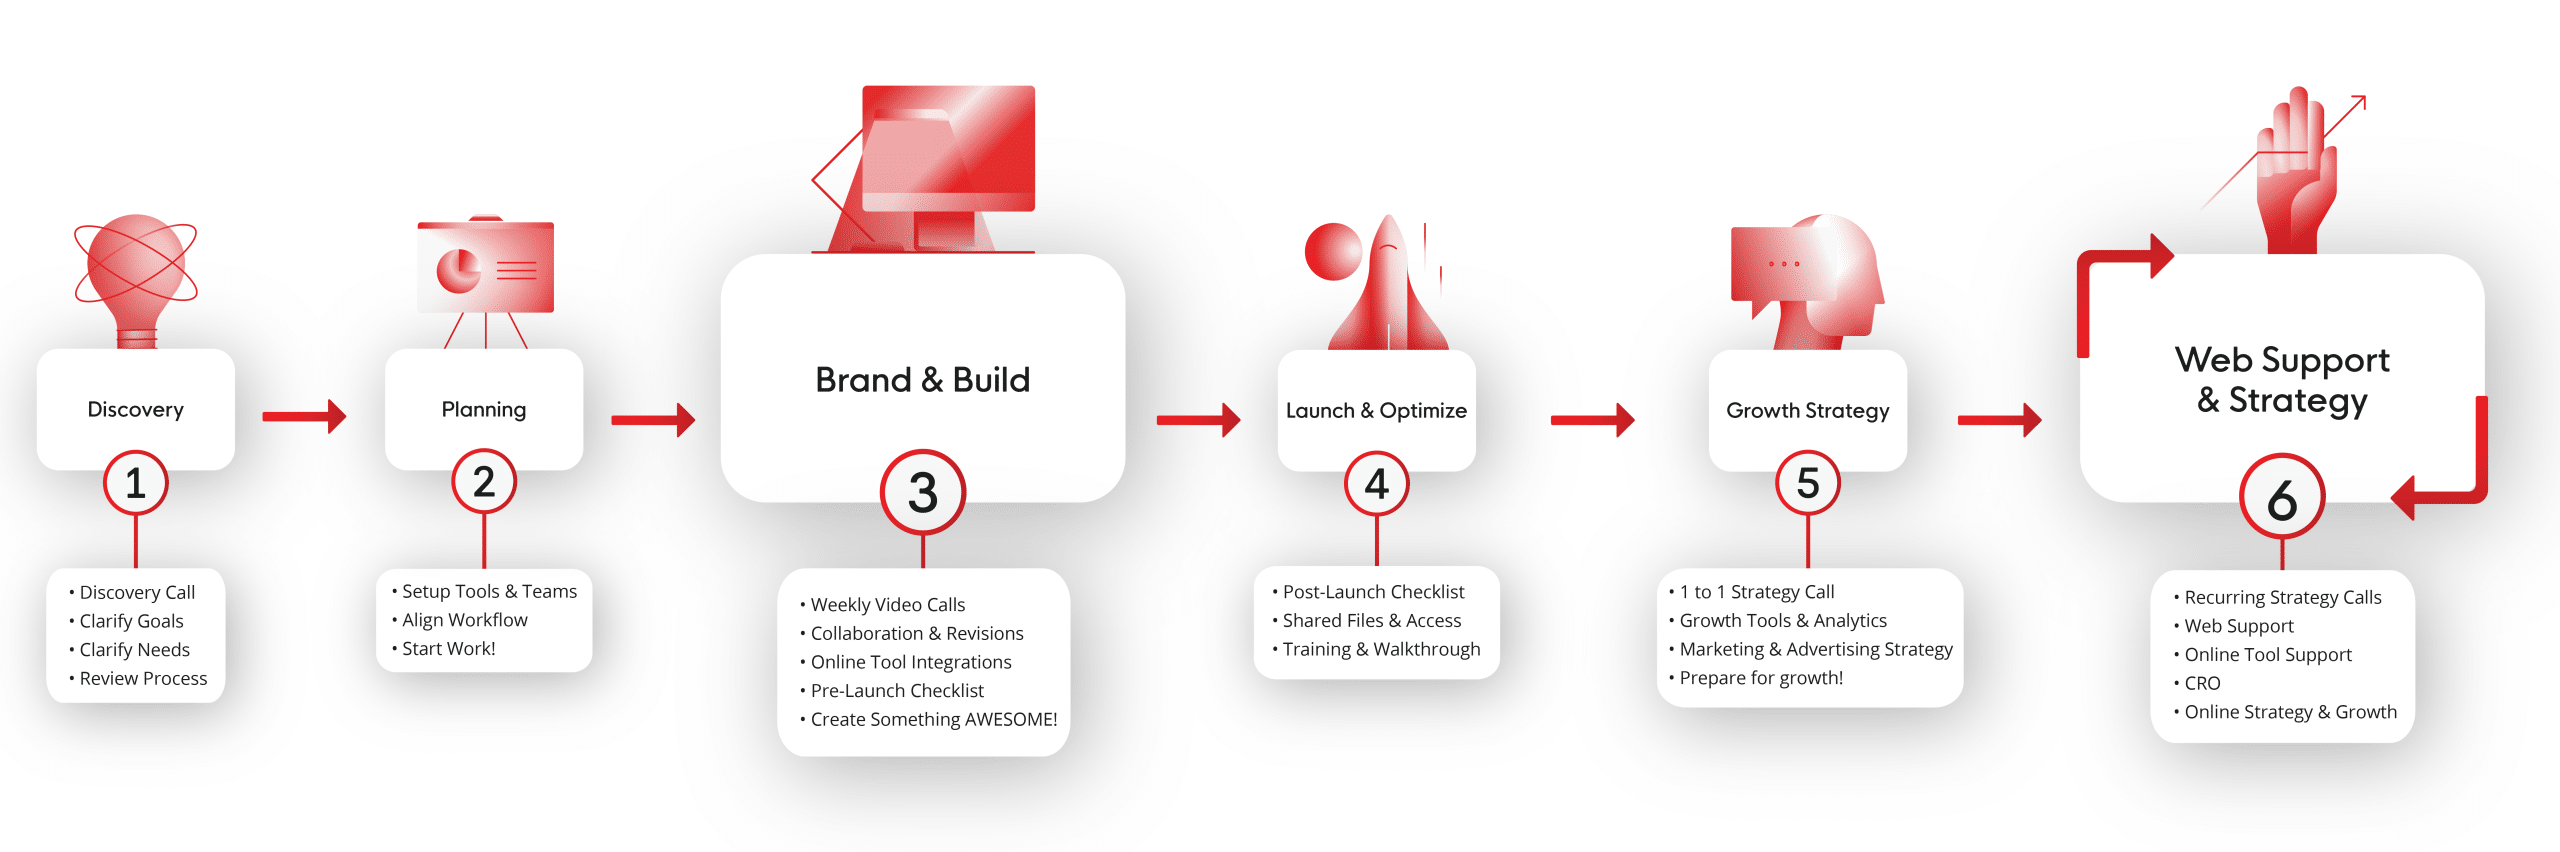 The Big Red Jelly client and website development process for clients.